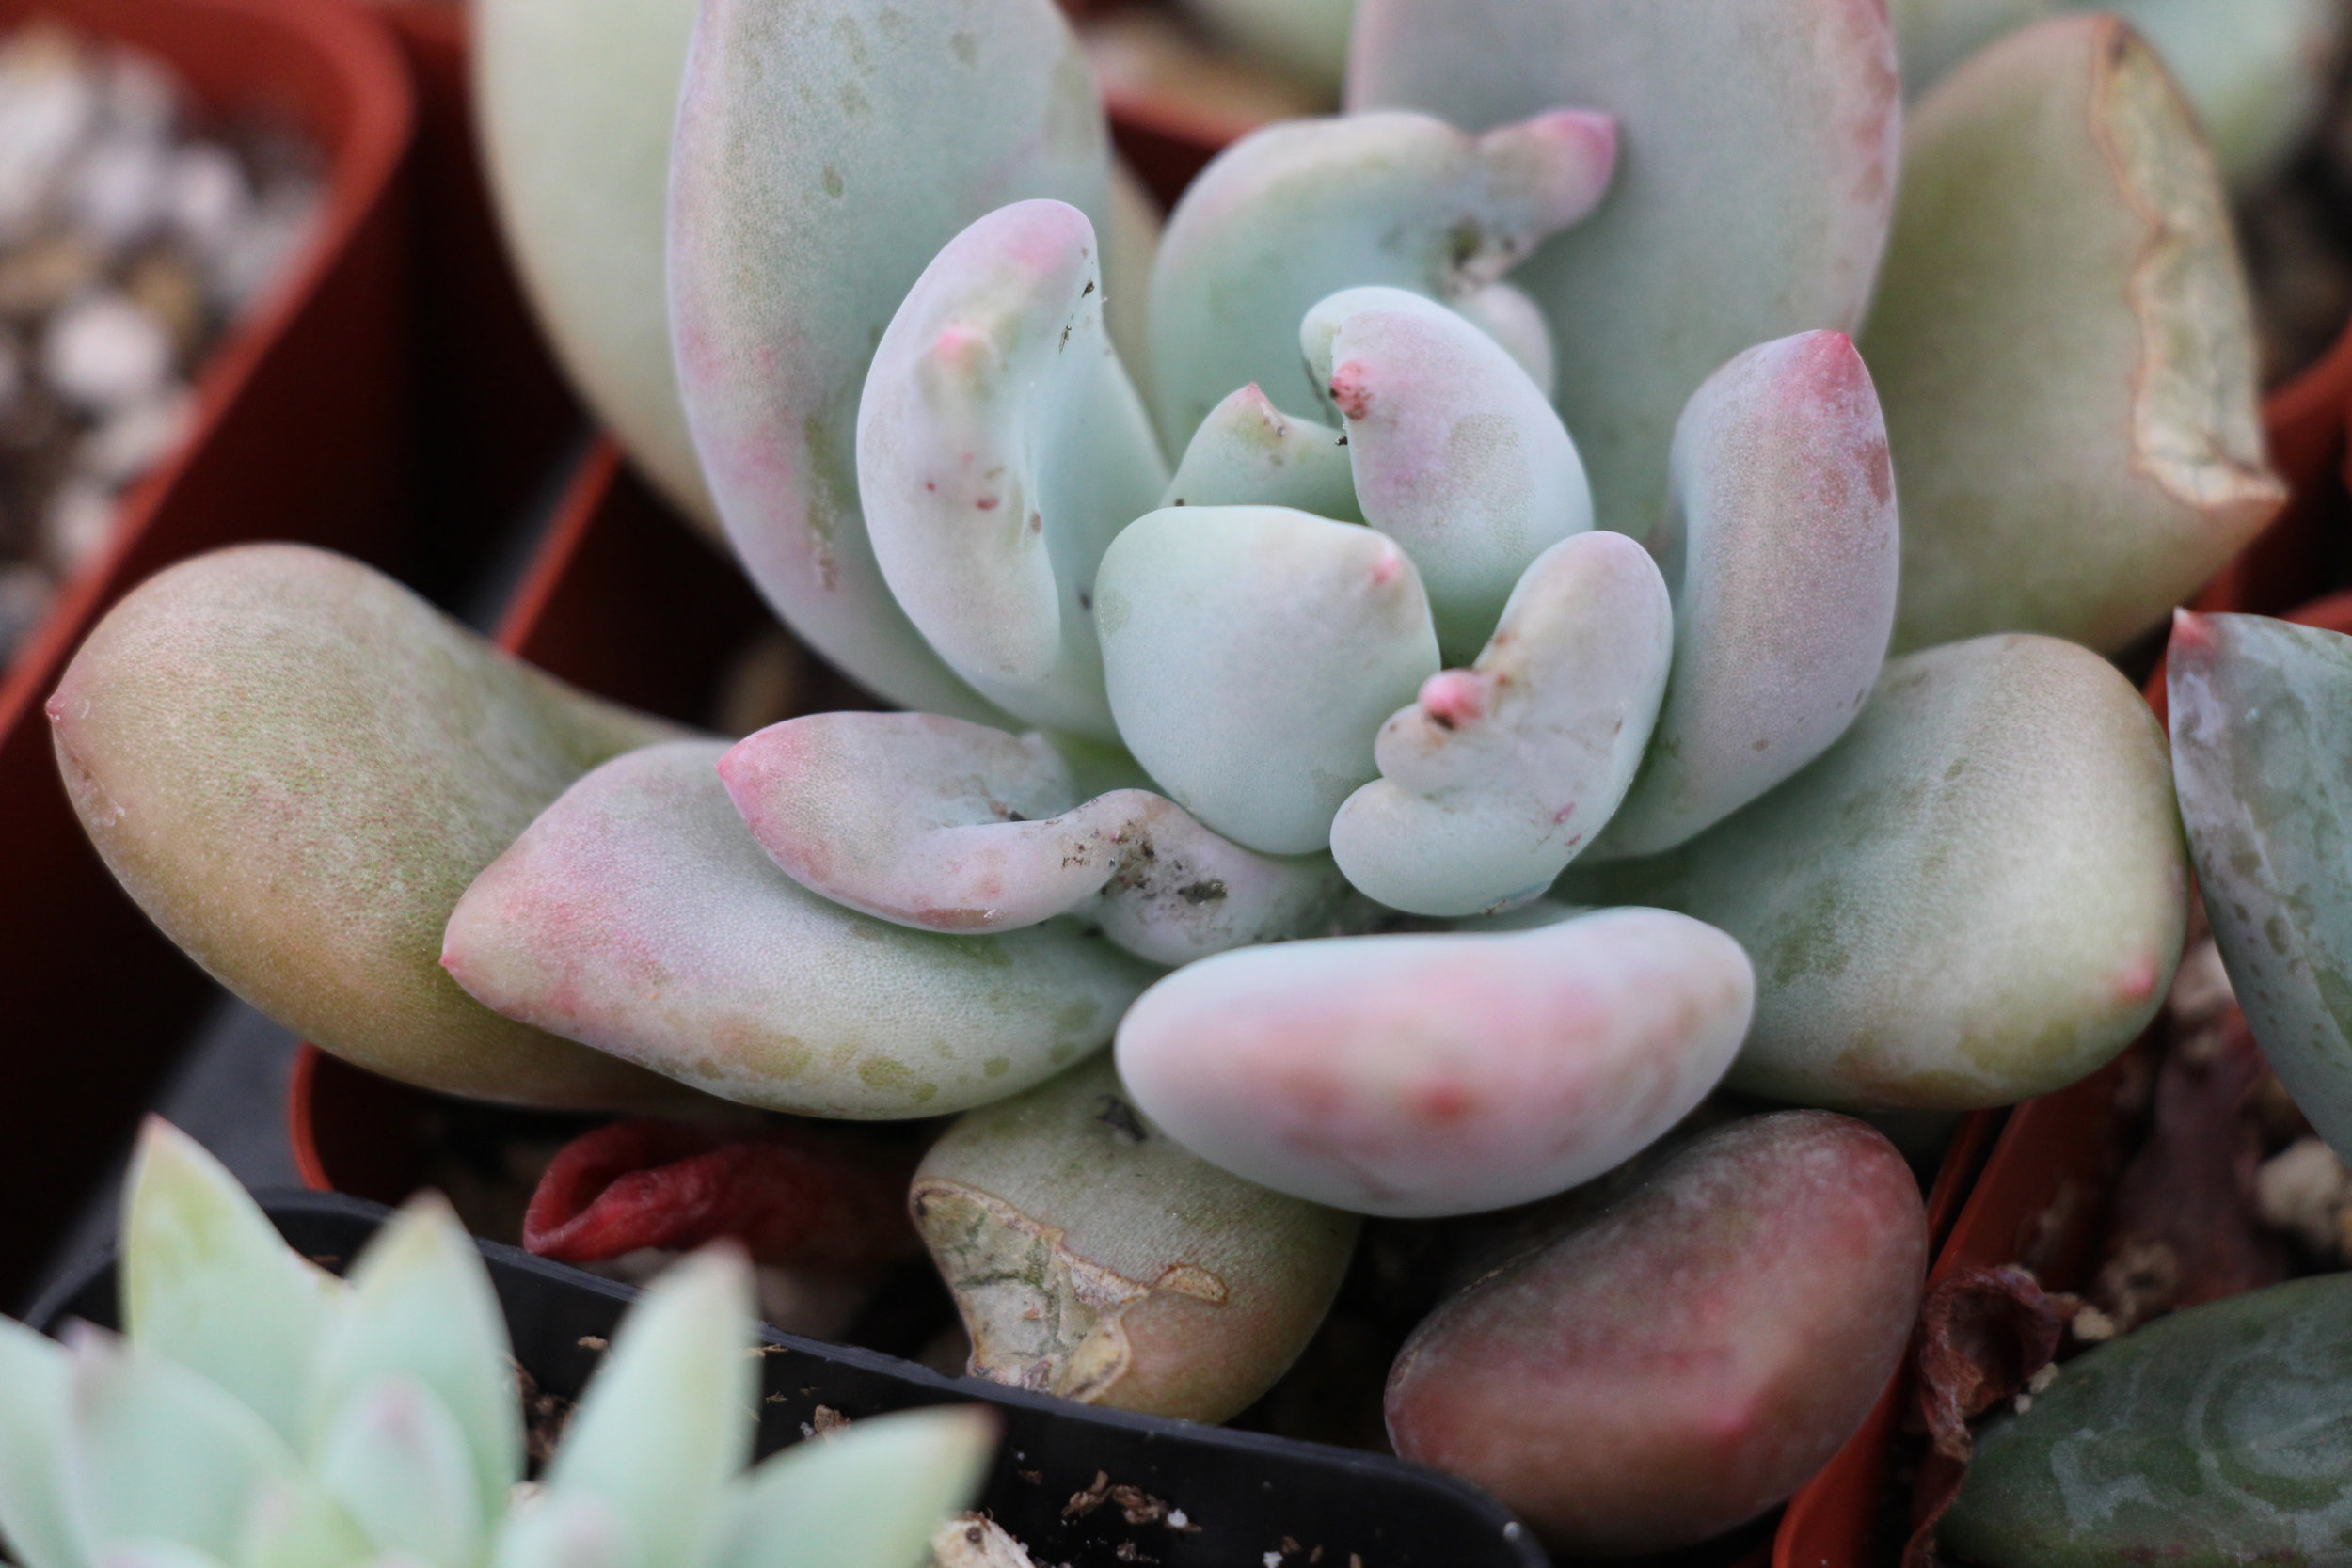 Close-up view of a succulent plant infested with mealybugs